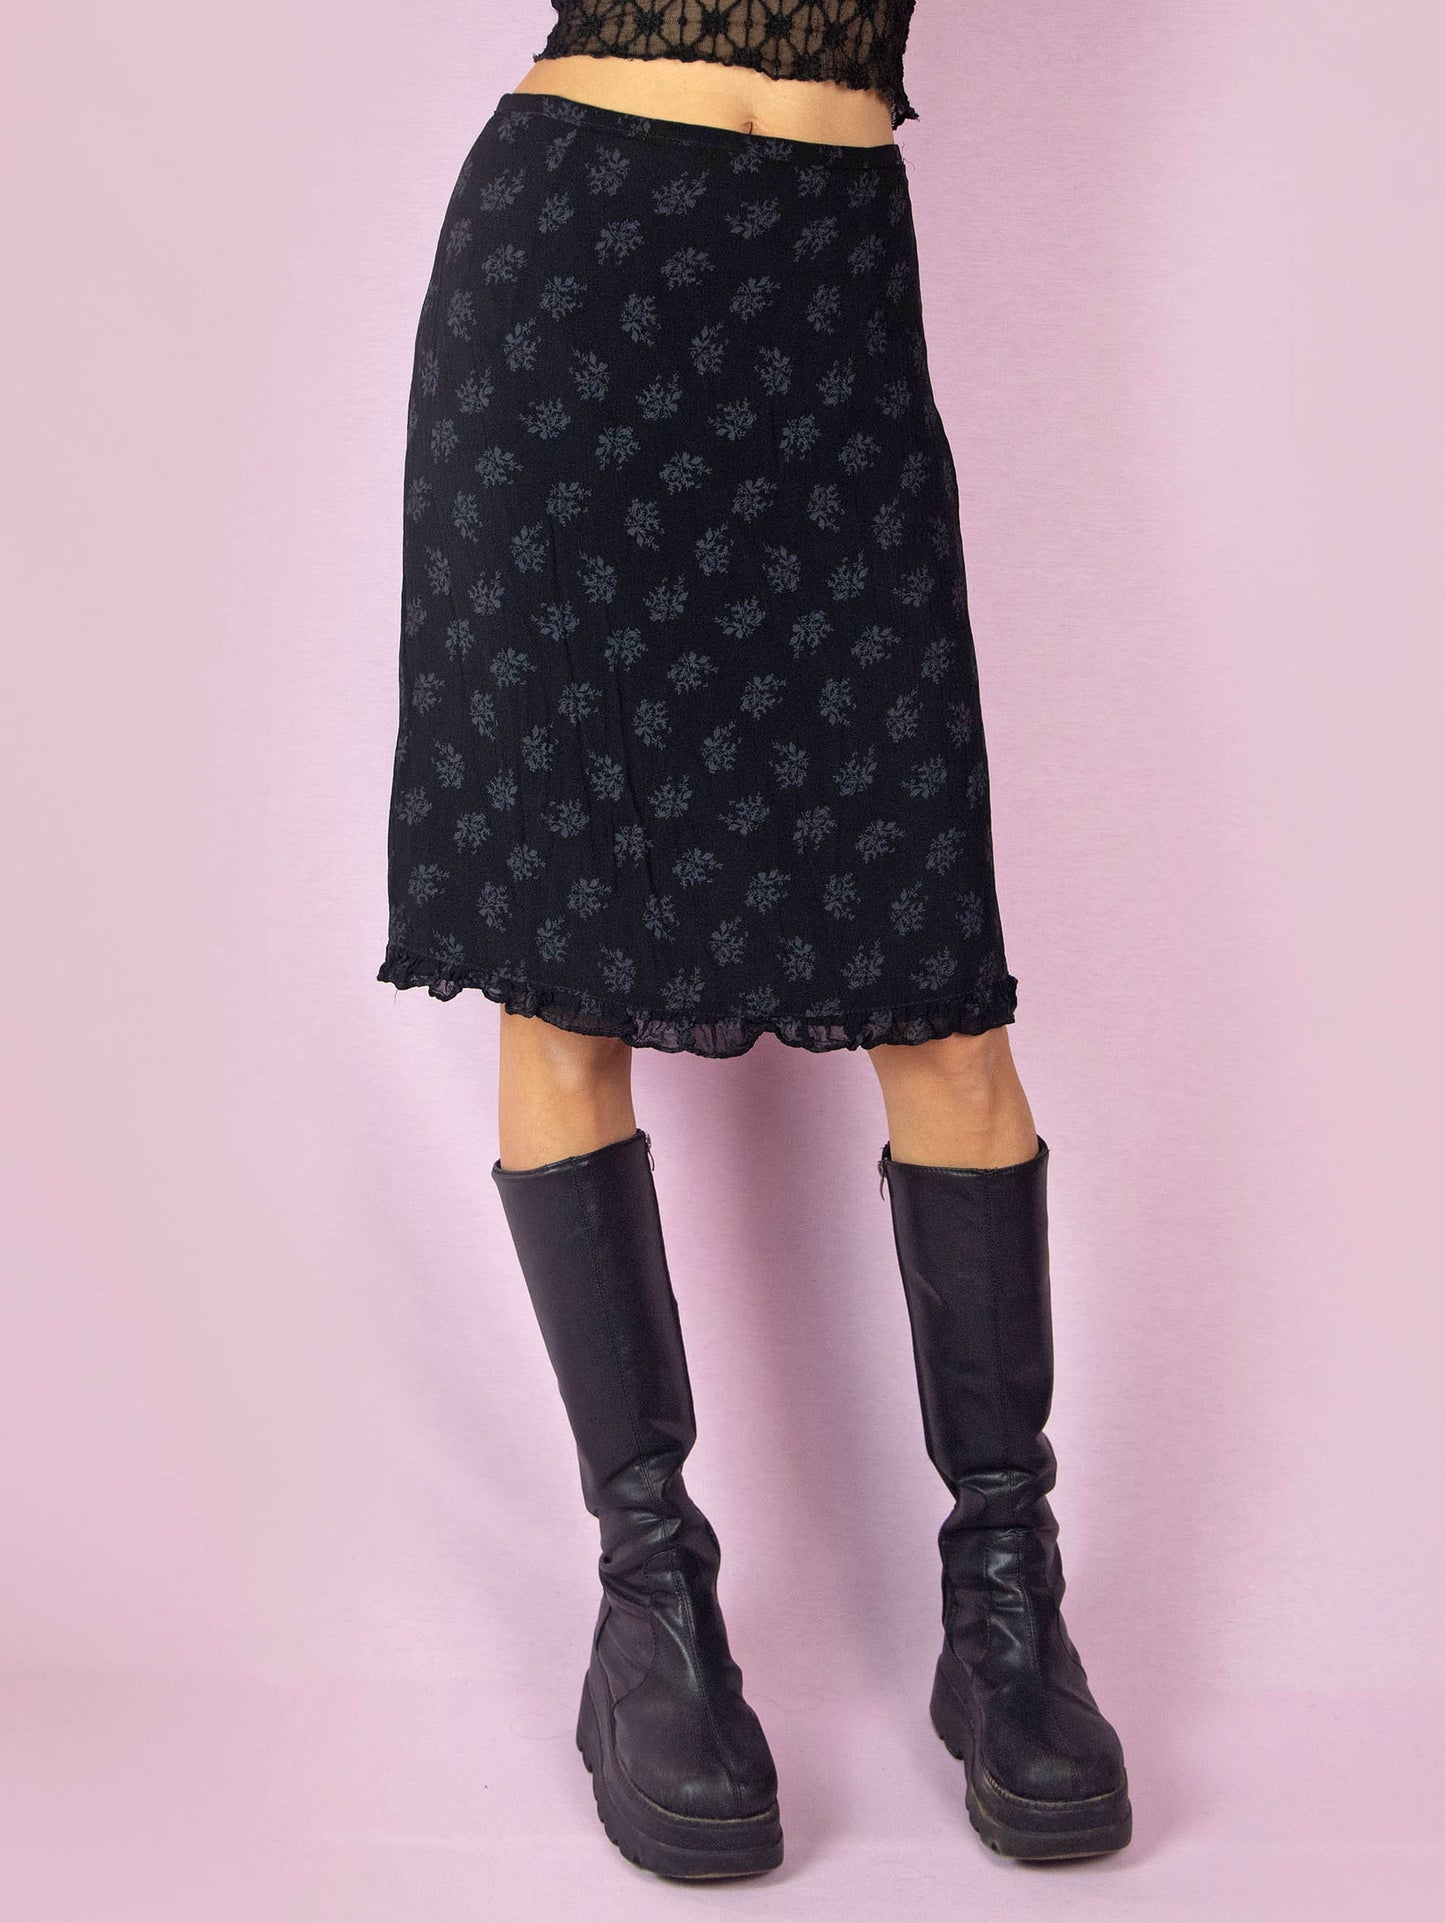 The Vintage 90s Black Floral Print Skirt is a high-waisted, straight pencil skirt with a ruffle hem and a side zipper closure. Made in France.